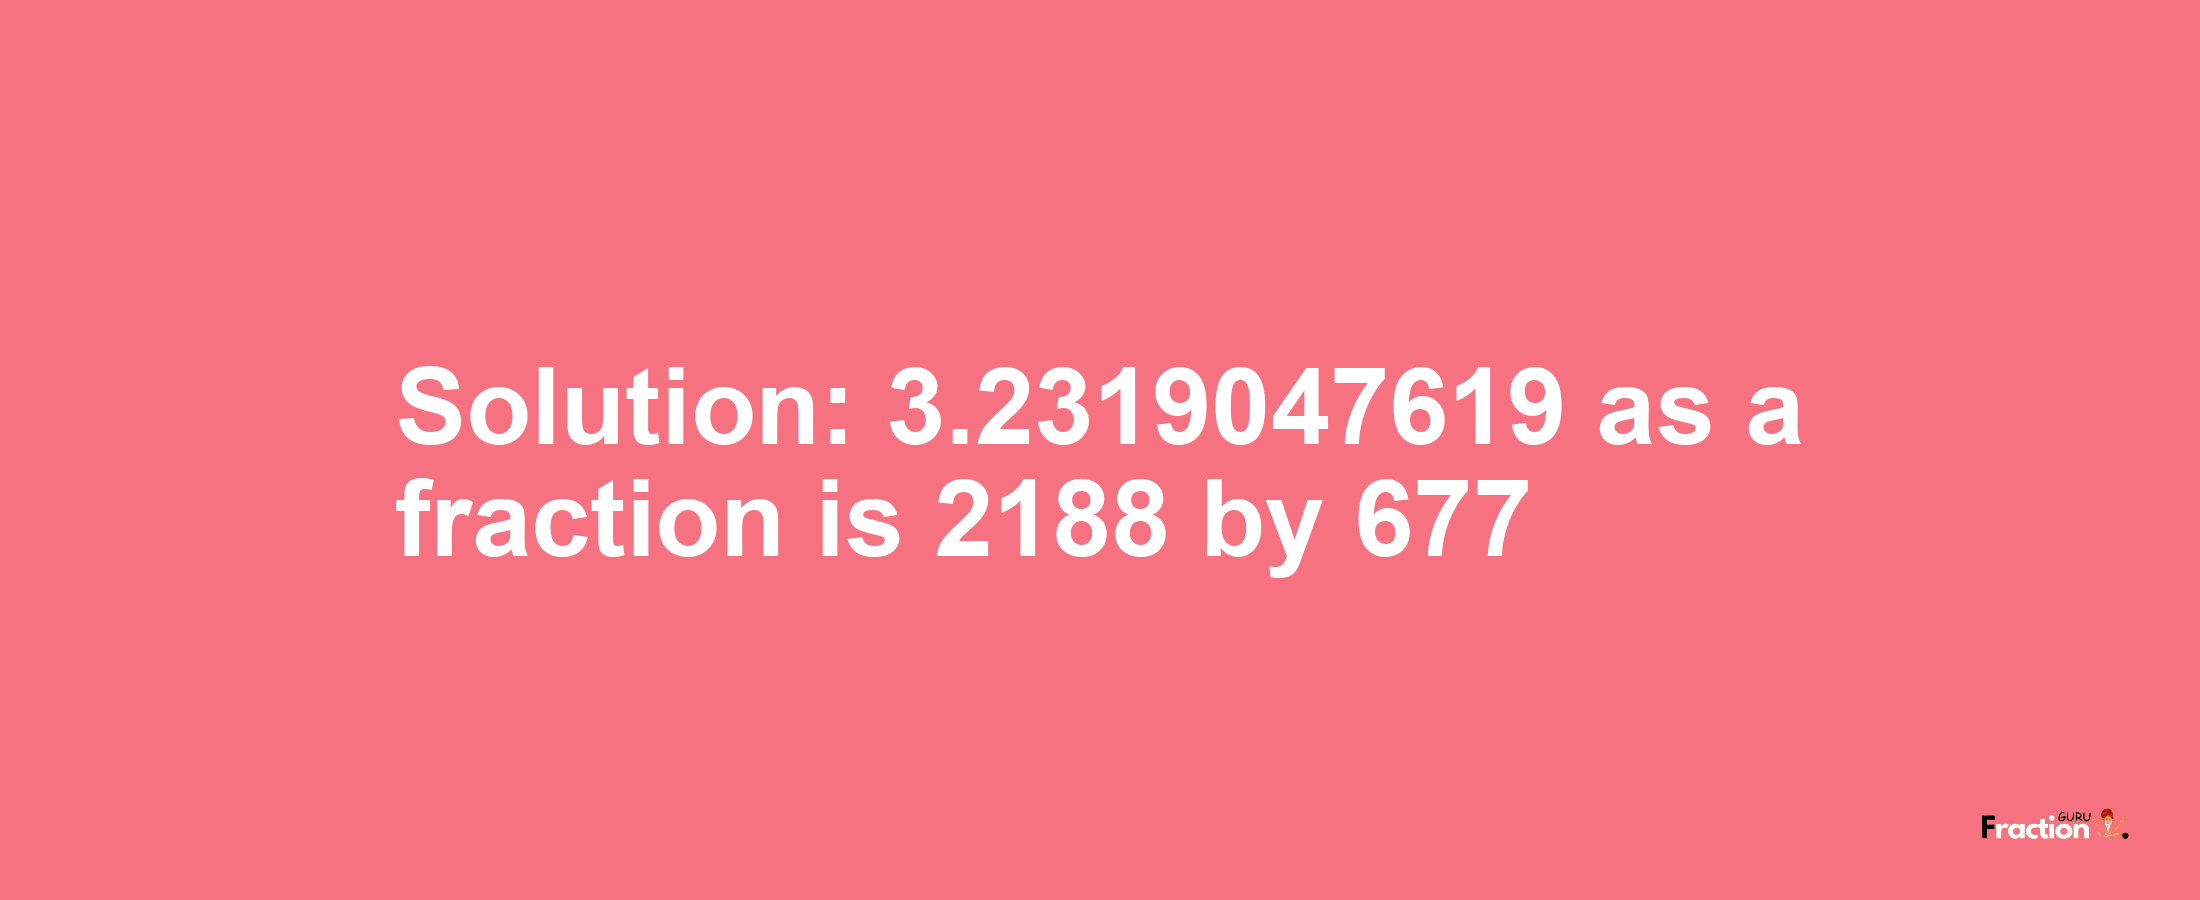 Solution:3.2319047619 as a fraction is 2188/677